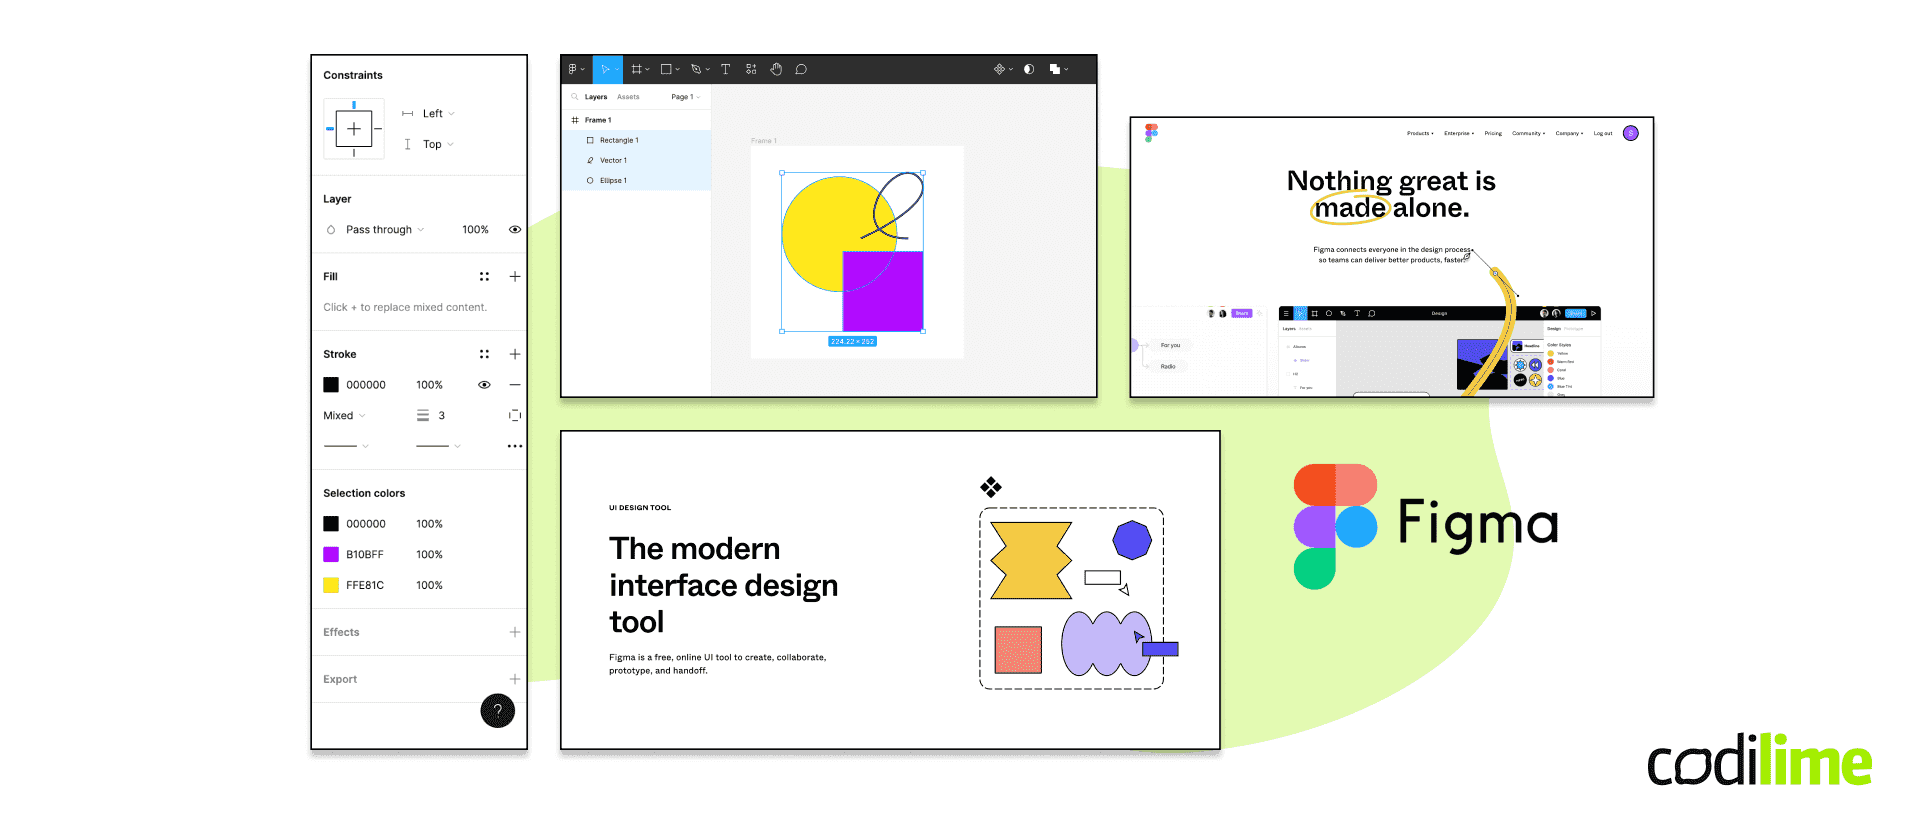  Tools for prototyping - Figma